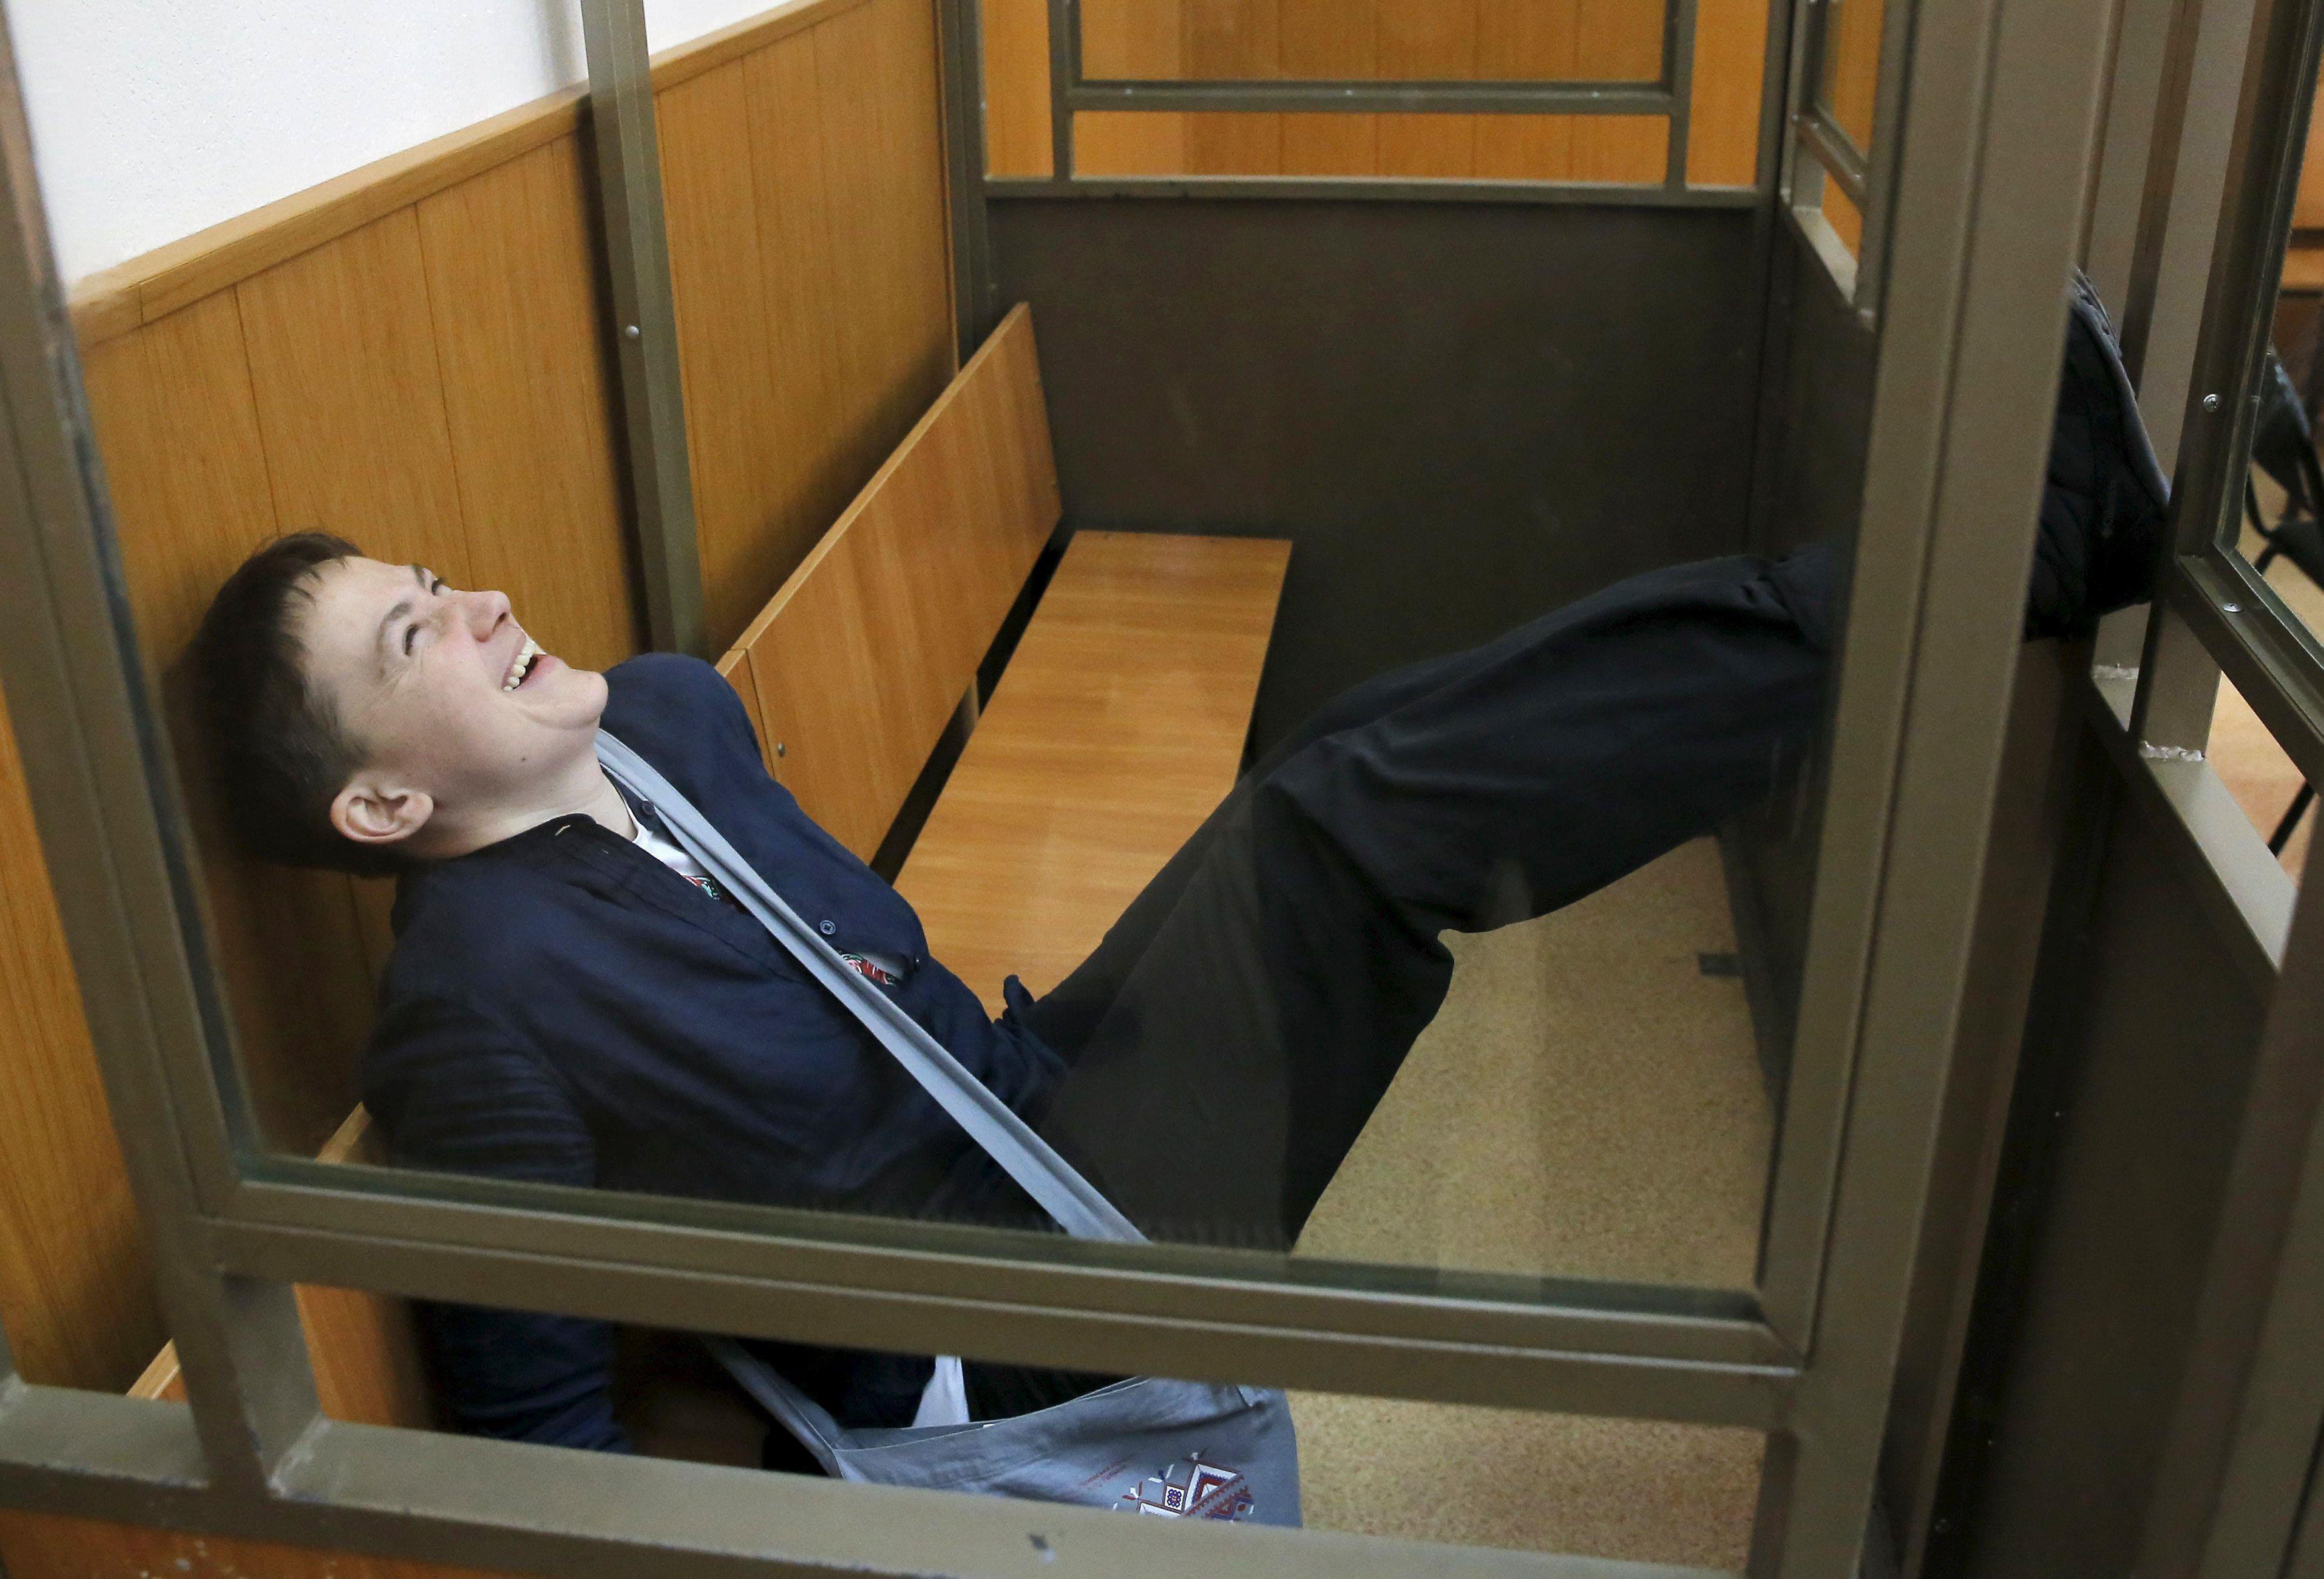 Former Ukrainian army pilot Savchenko reacts from glass-walled cage during verdict hearing at court 